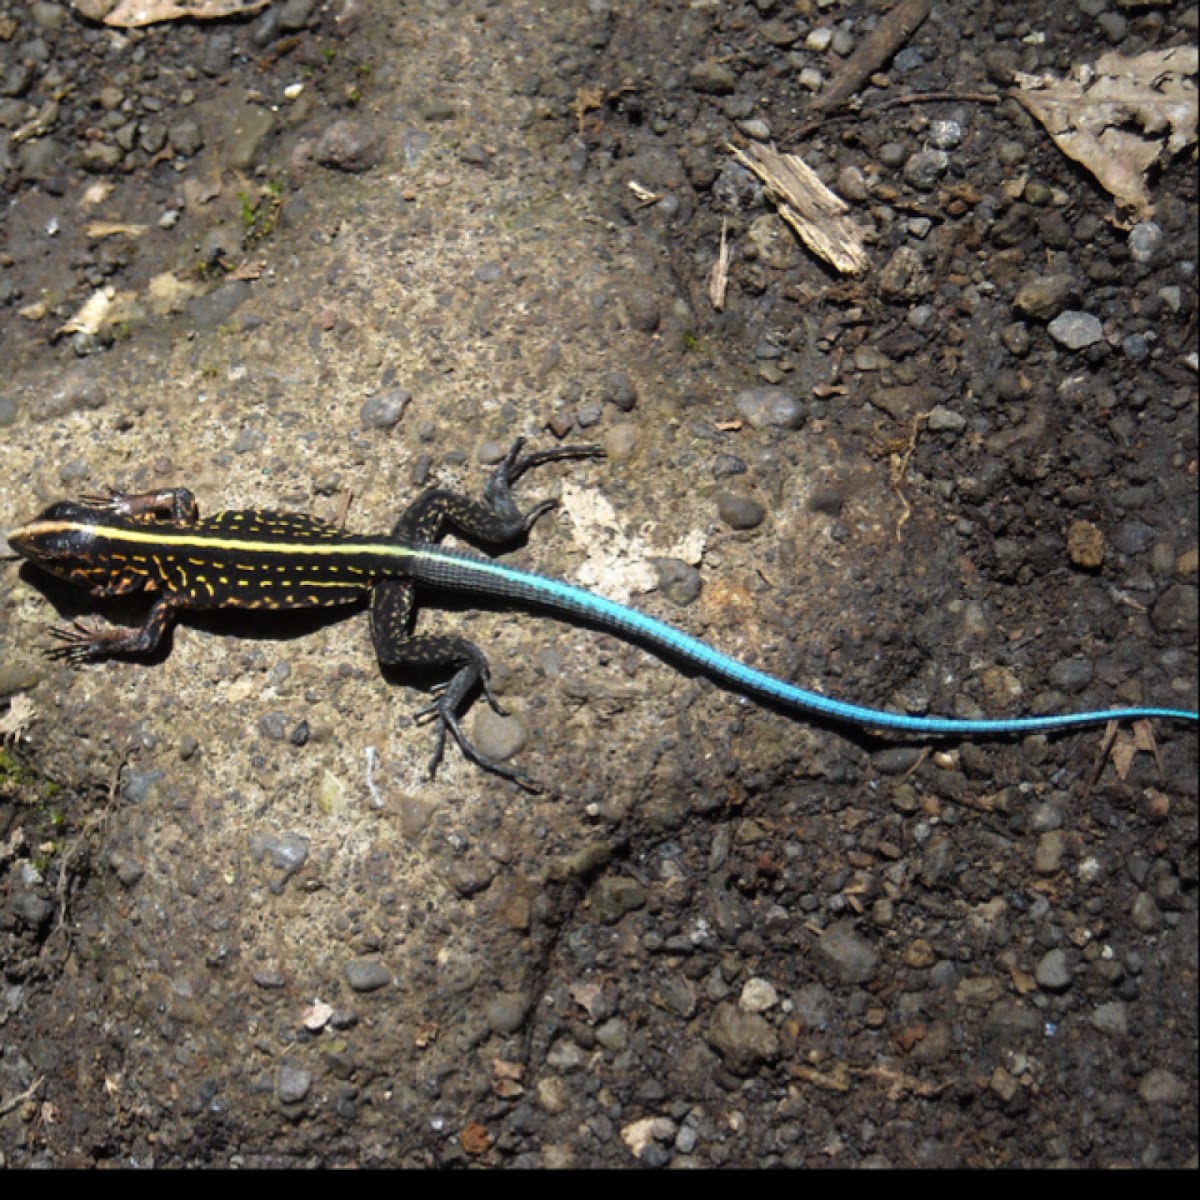 Central American whiptail